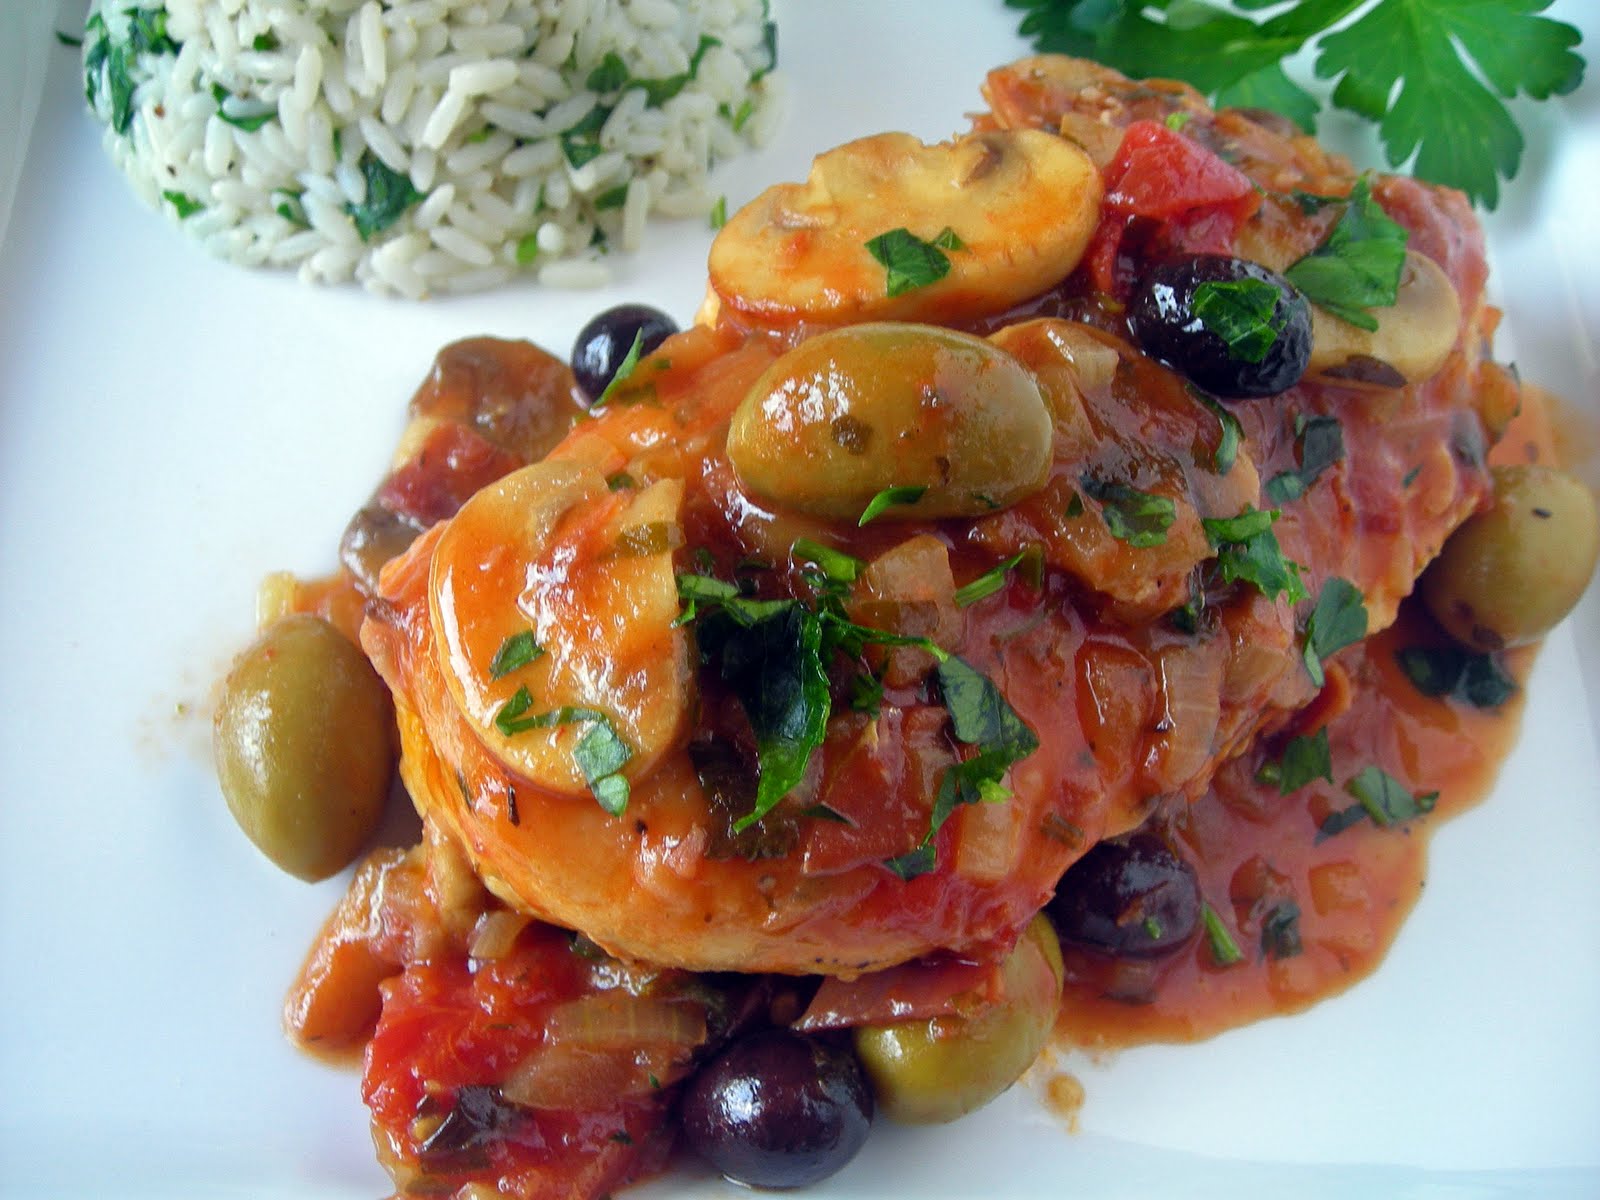 My Carolina Kitchen: Chicken Marengo – the famous French dish invented ...